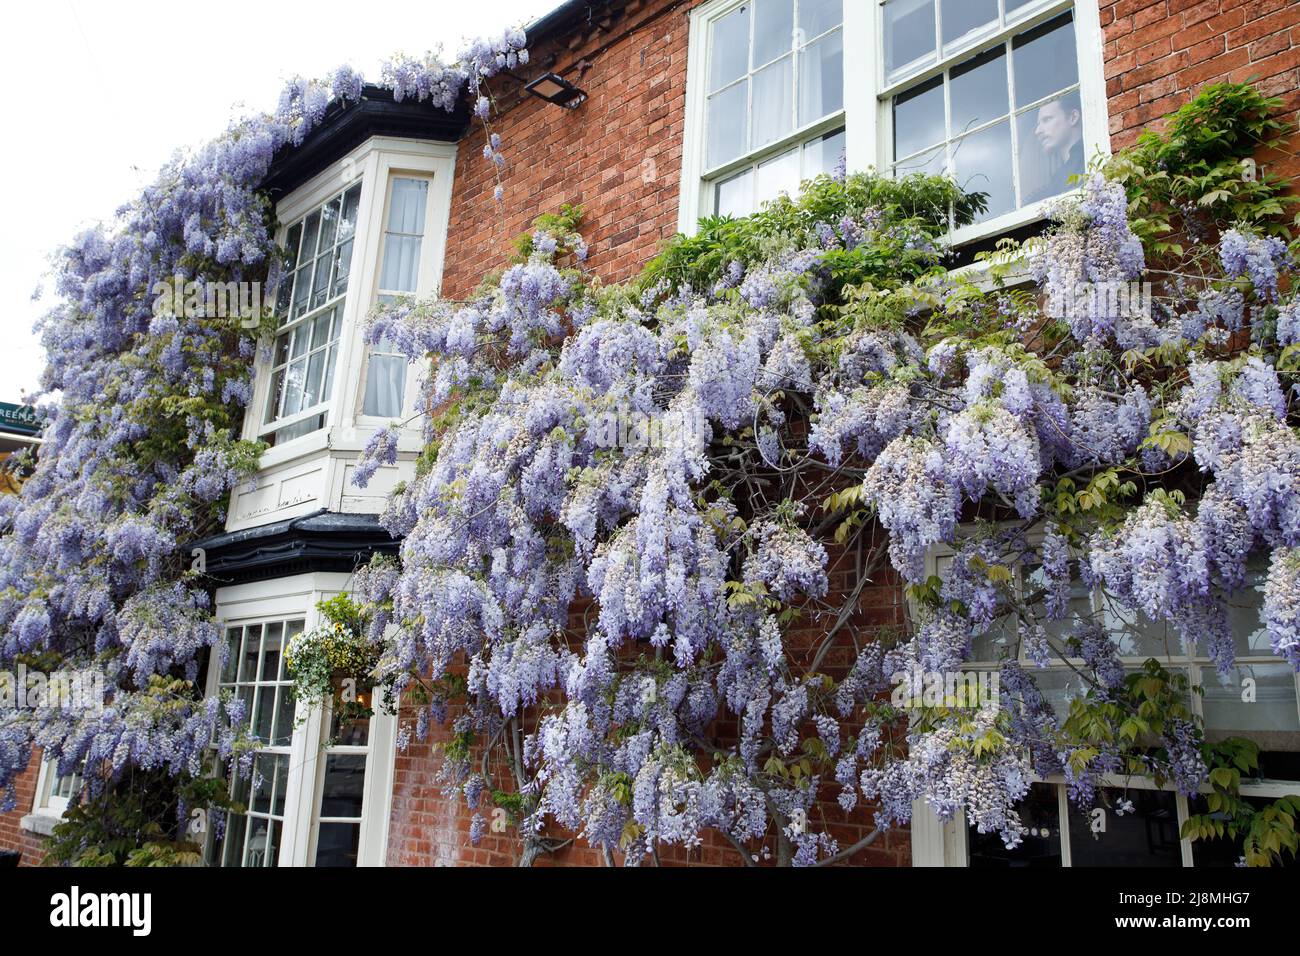 A huge wisteria covering the frontage of the Pen and Parchment public house in the centre of Stratford upon Avon. The public house sits opposite the Royal Shakespeare Theatre near the river. It is a Greene King pub. Stock Photo